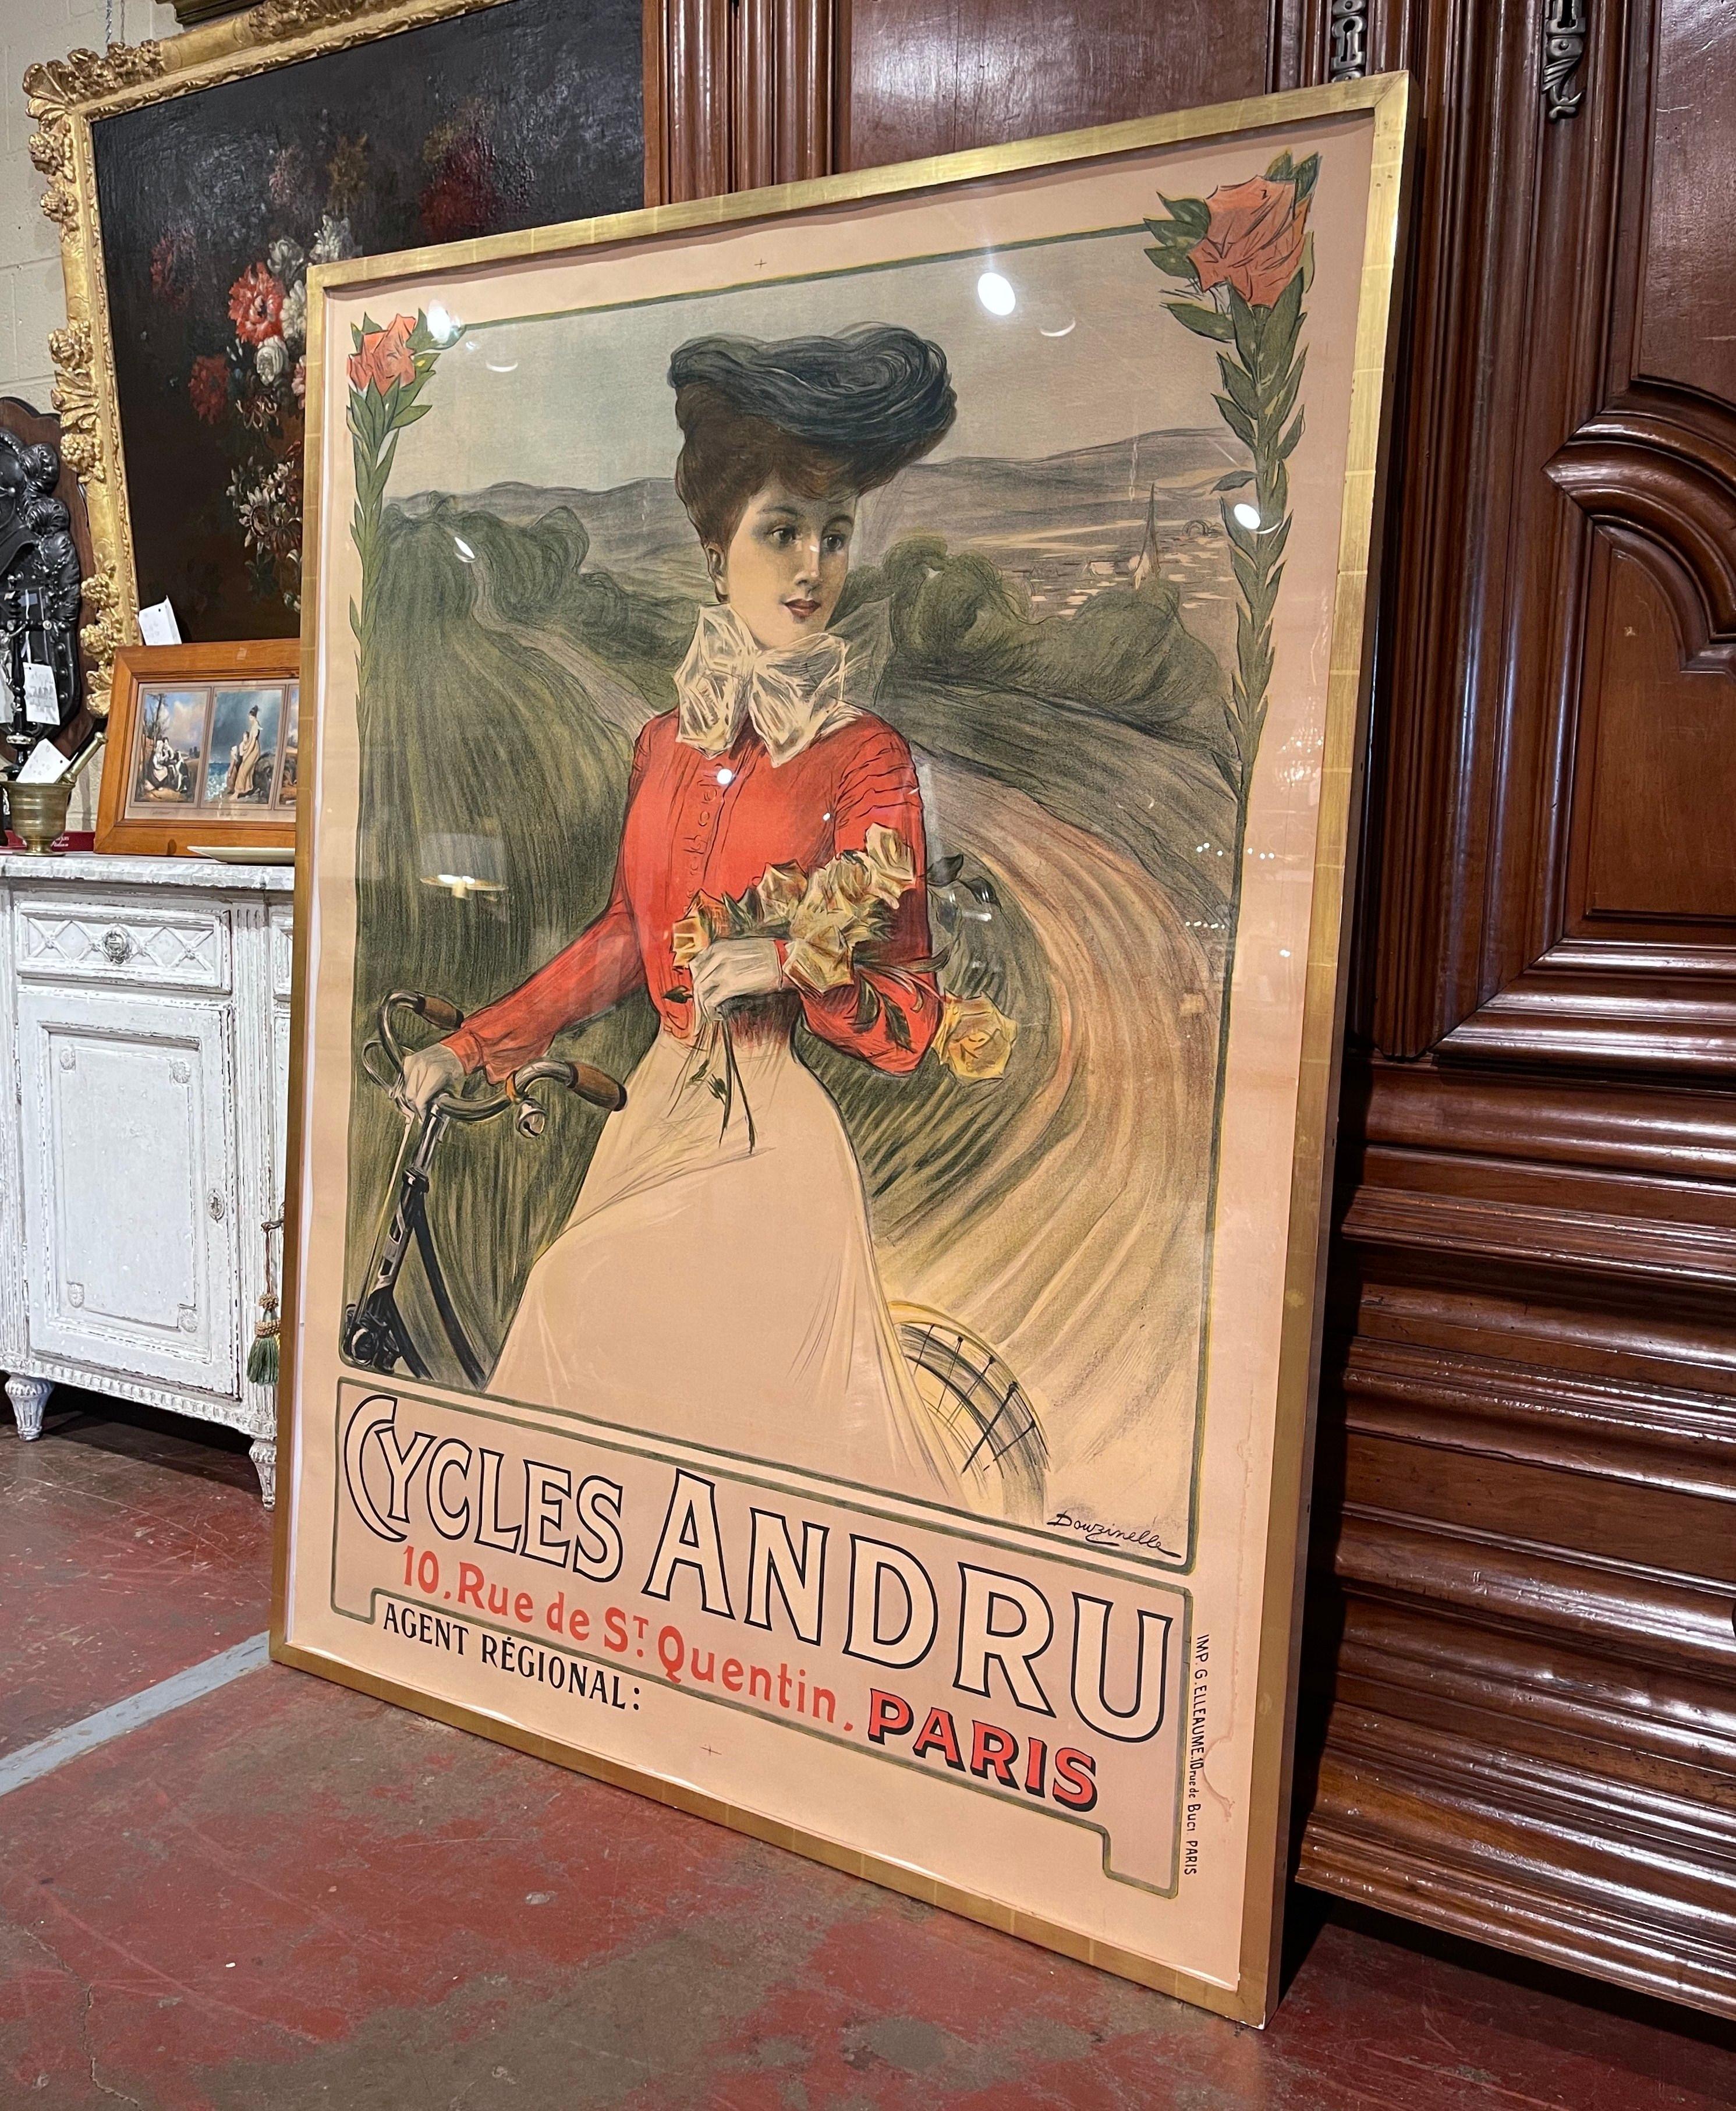 Decorate a game room or exercise room with this large and colorful antique Belle Epoque poster! Created by artist Dourzinelle circa 1890 for Andru Cycles, the wonderfully made stone lithograph features an elegantly dressed woman in the center